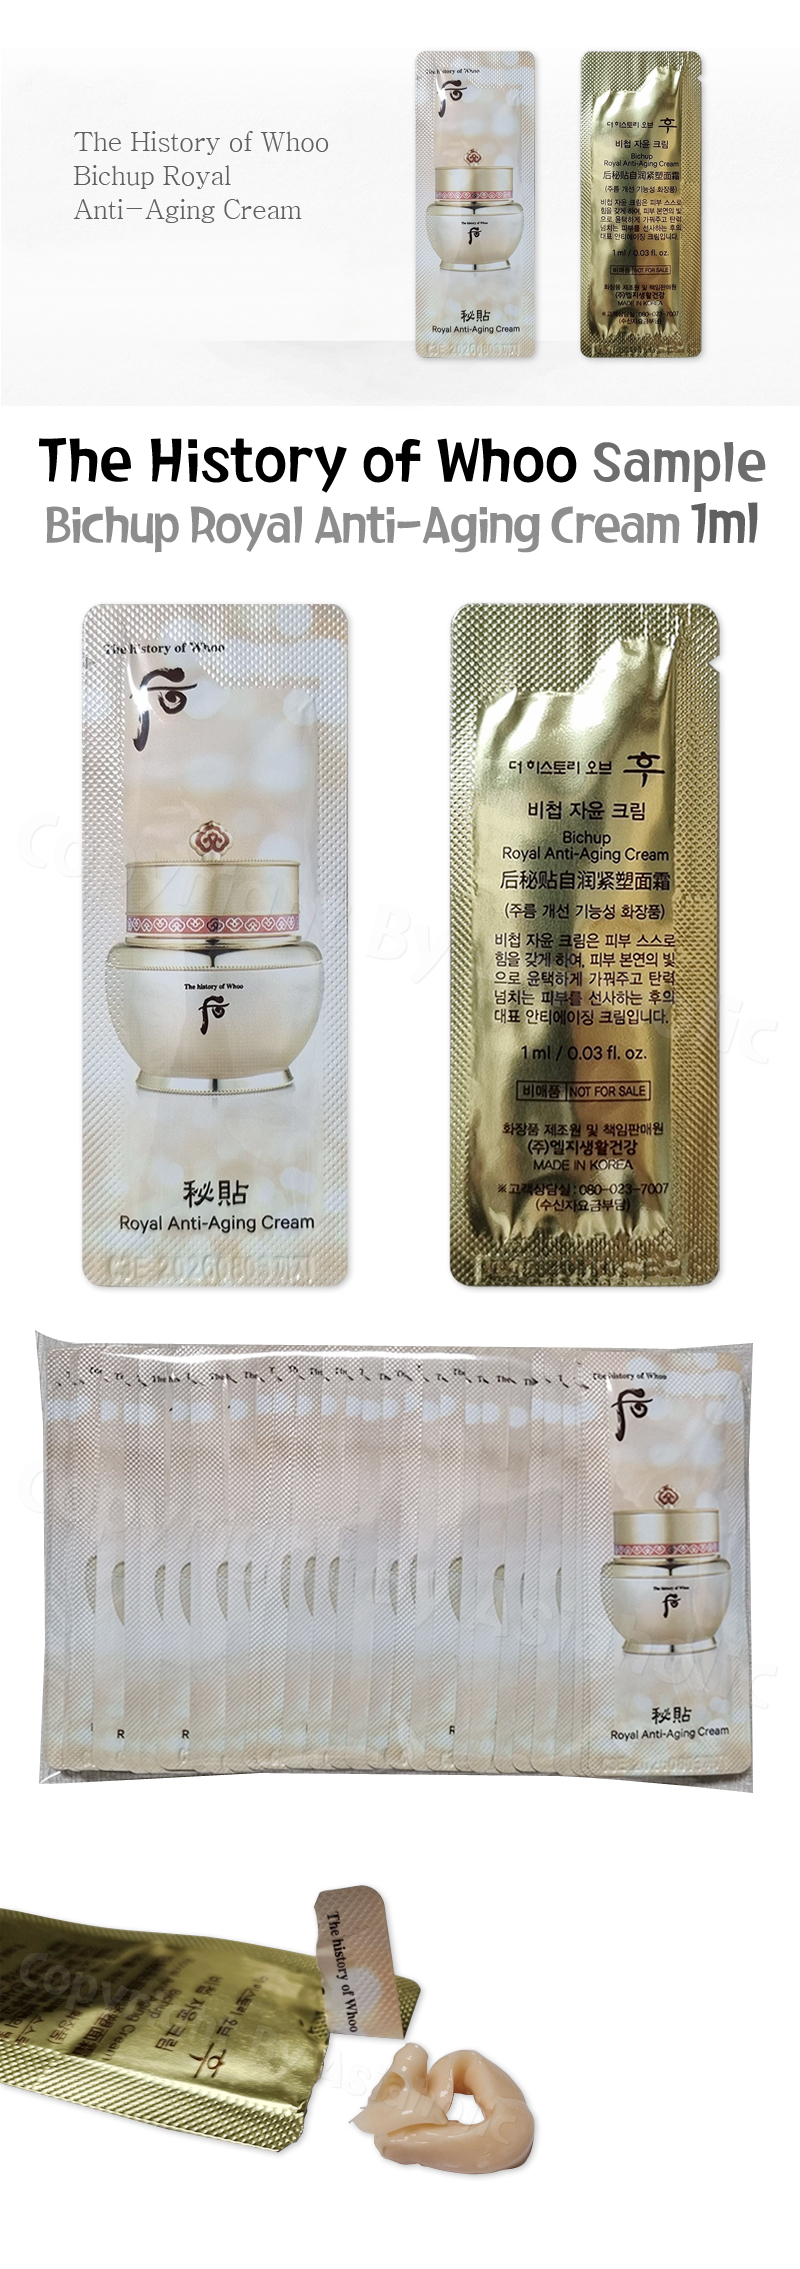 The history of Whoo Bichup Royal Anti-Aging Cream 1ml x 50pcs (50ml) Sample Newest Verion